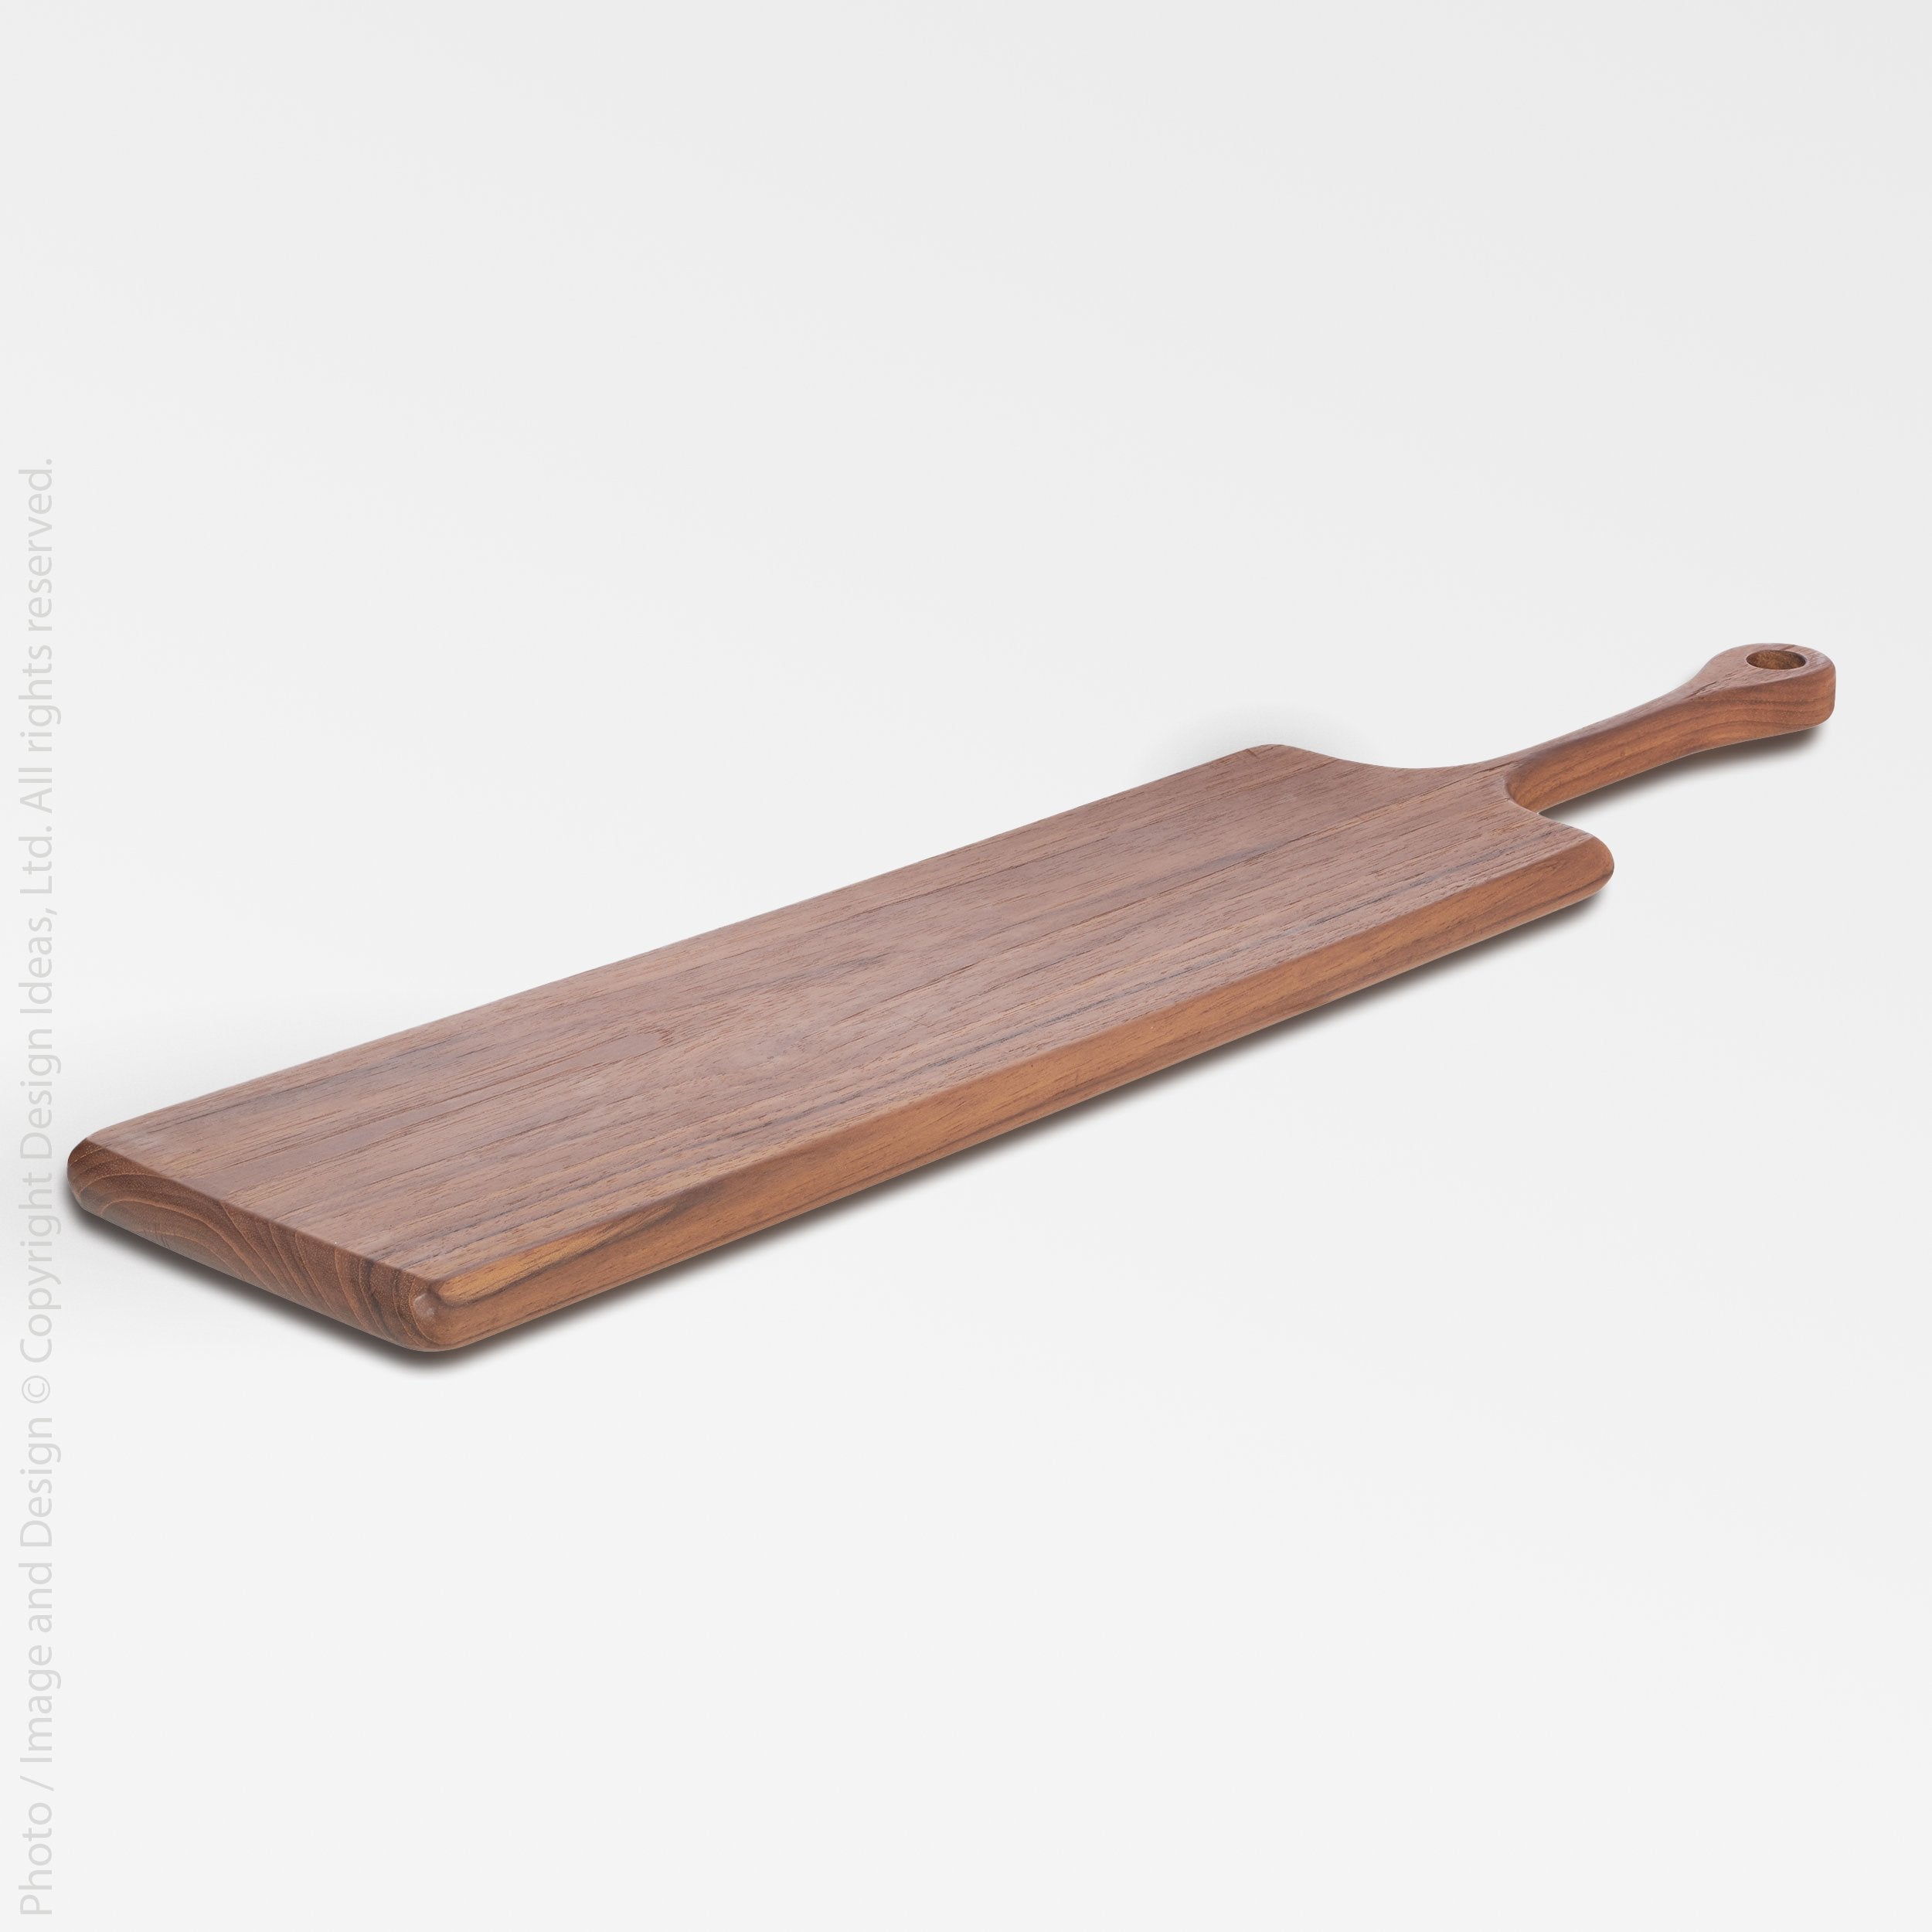 Chiku Teak Platter (With Handle) - Black Color | Image 1 | From the Chiku Collection | Elegantly assembled with natural teak for long lasting use | This platter is sustainably sourced | Available in natural color | texxture home